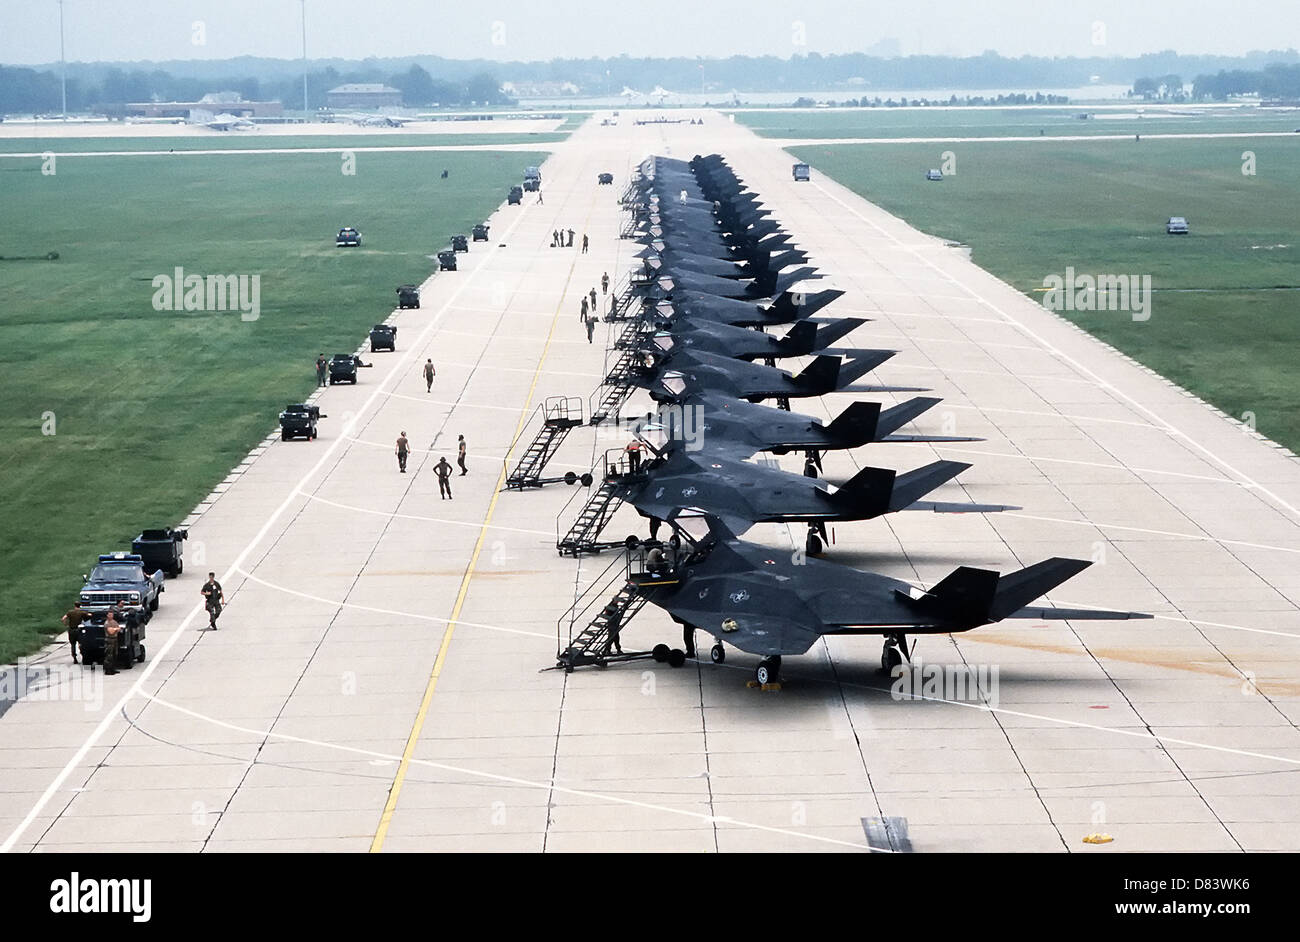 US Air Force F-117A Stealth fighter aircraft assigned to the 37th Tactical Fighter Wing line the runway during an overnight stop on their way to Saudi Arabia for the Iraq War September 5, 2002 at Langley Air Force Base, VA. Stock Photo